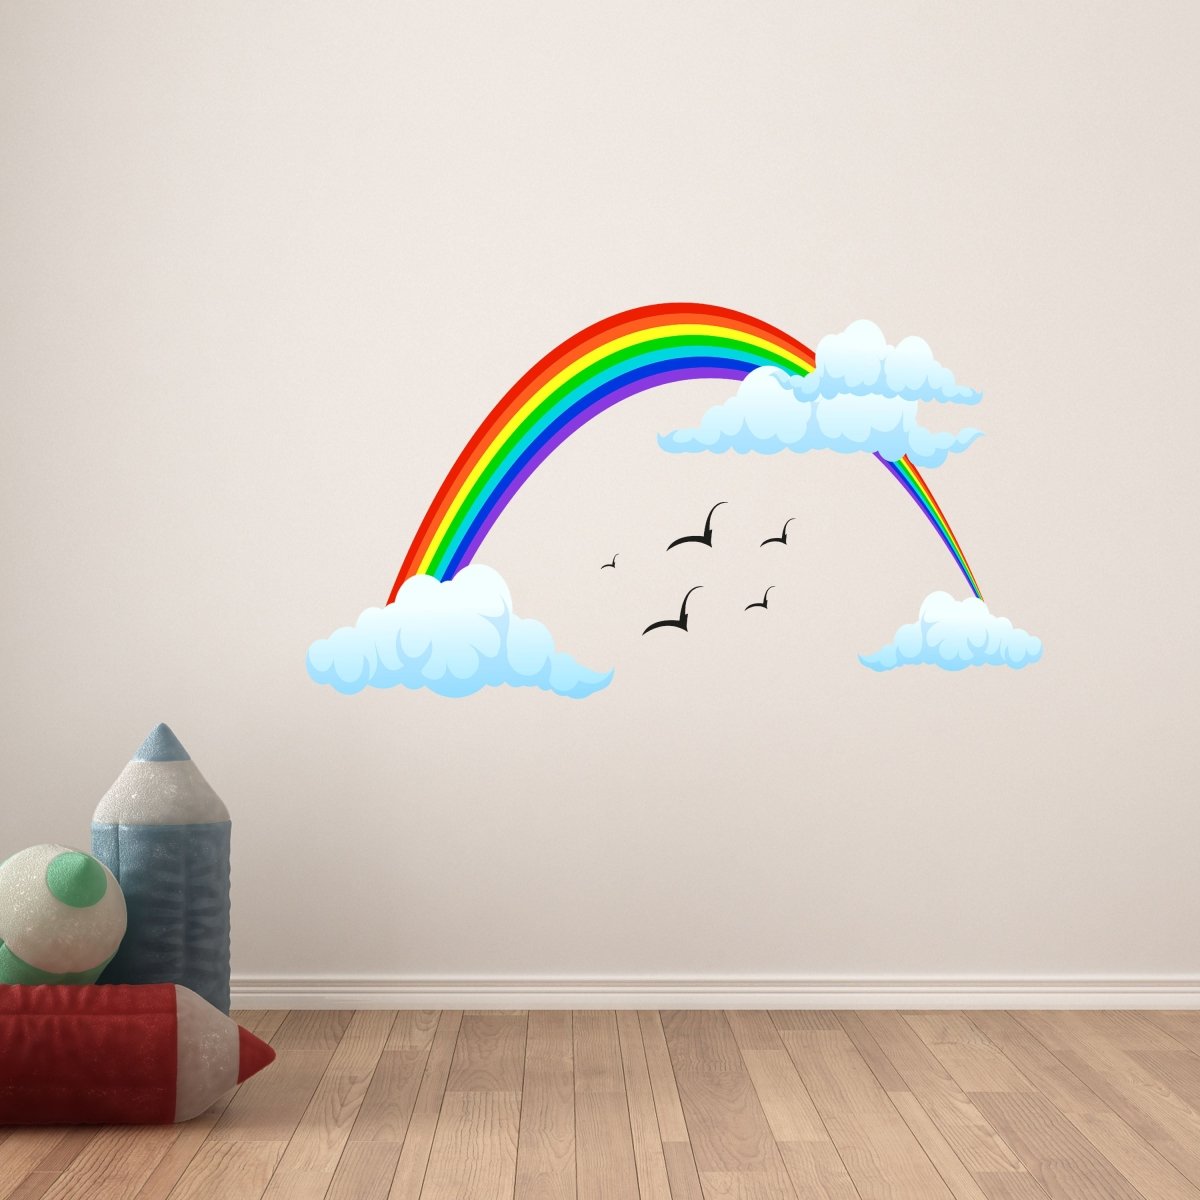 Discover wall stickers colorful rainbow, clouds, birds, sky WS00000059 | Wandtattoos